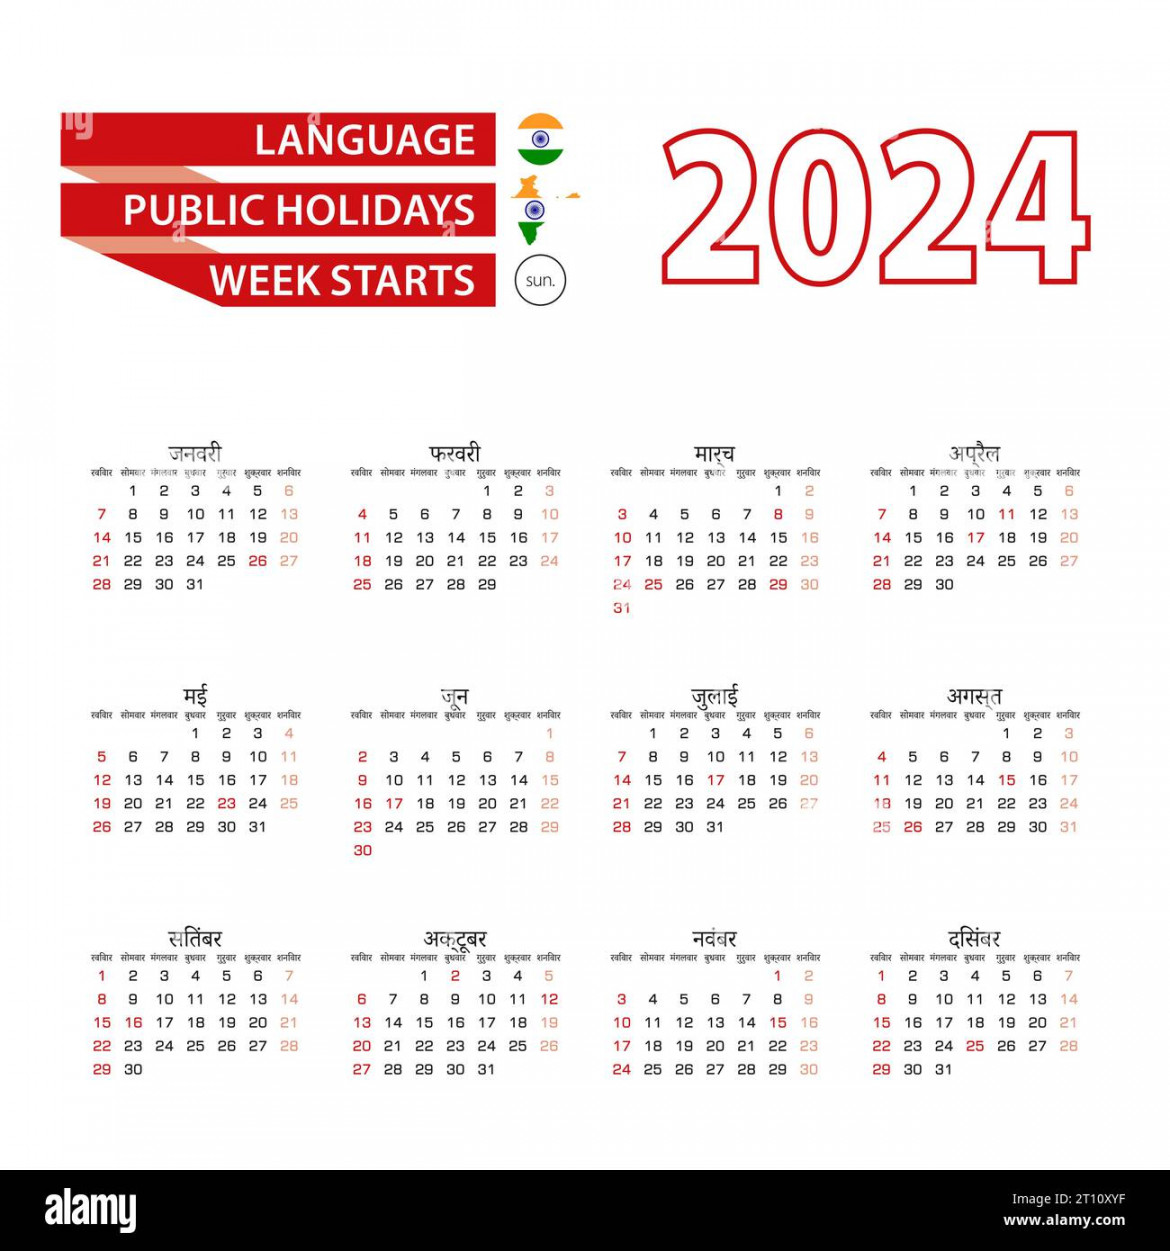 Calendar  in Hindi language with public holidays the country